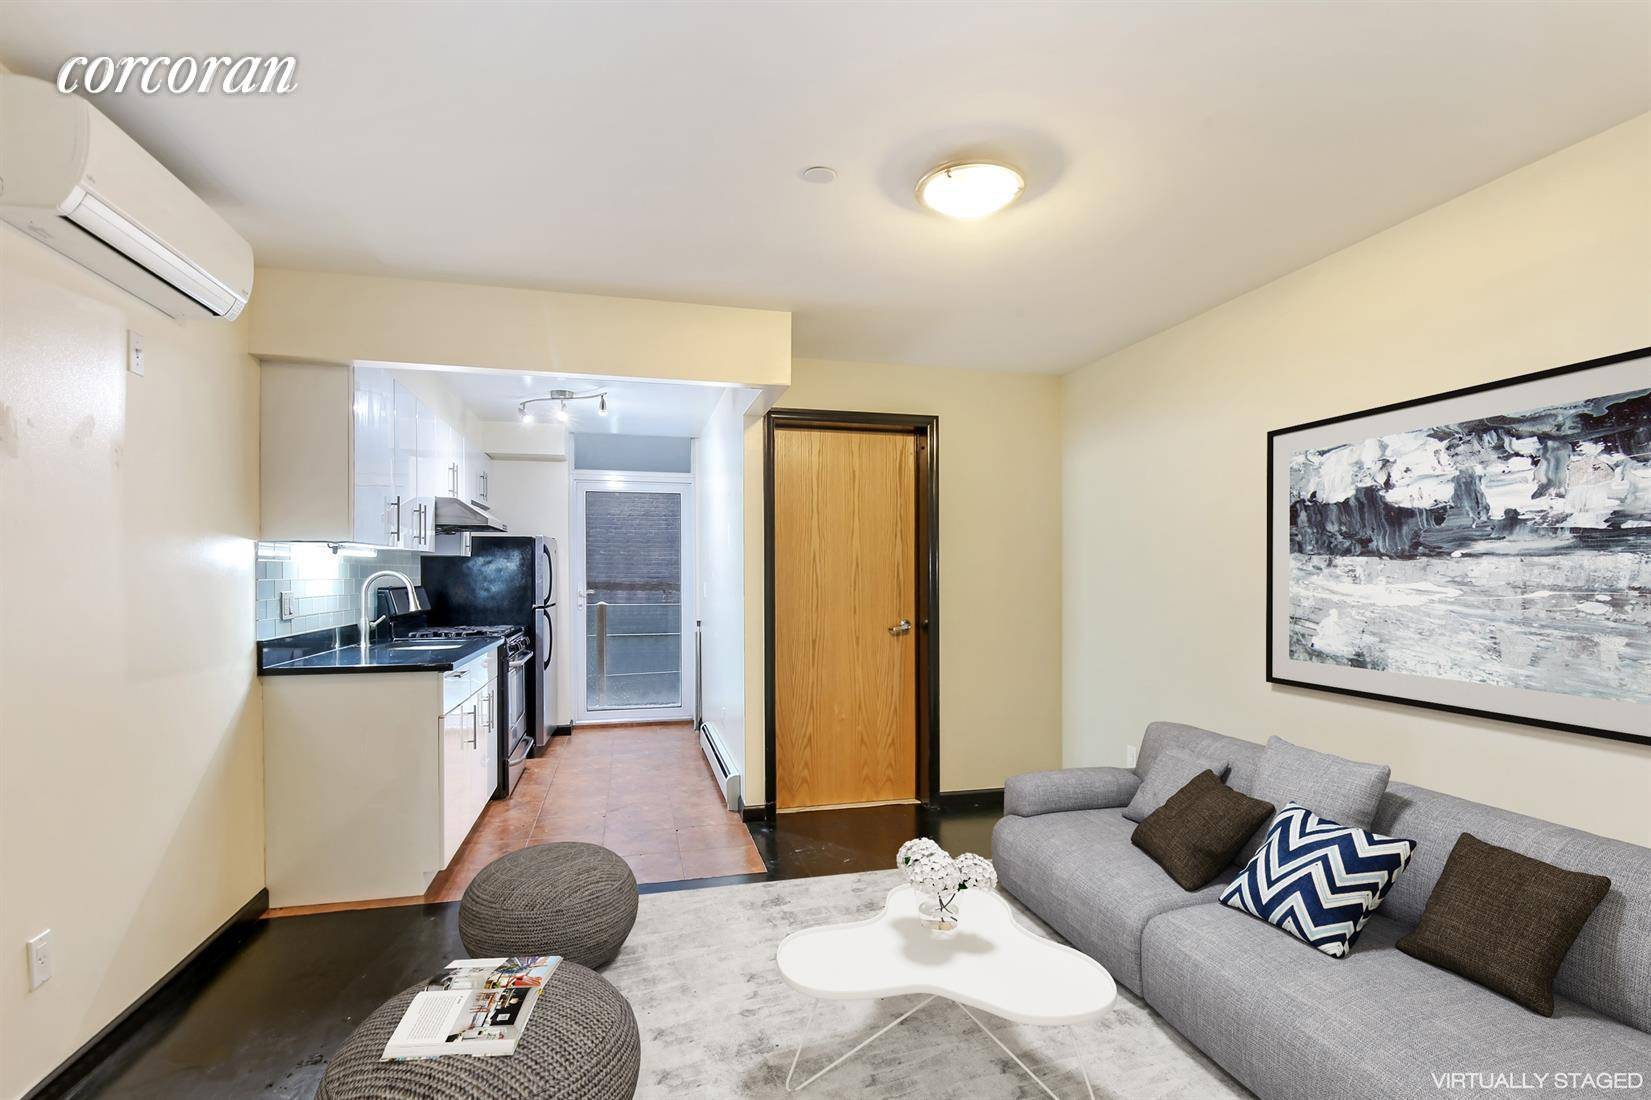 Gorgoues 2BR at 24 Henry St 4A !